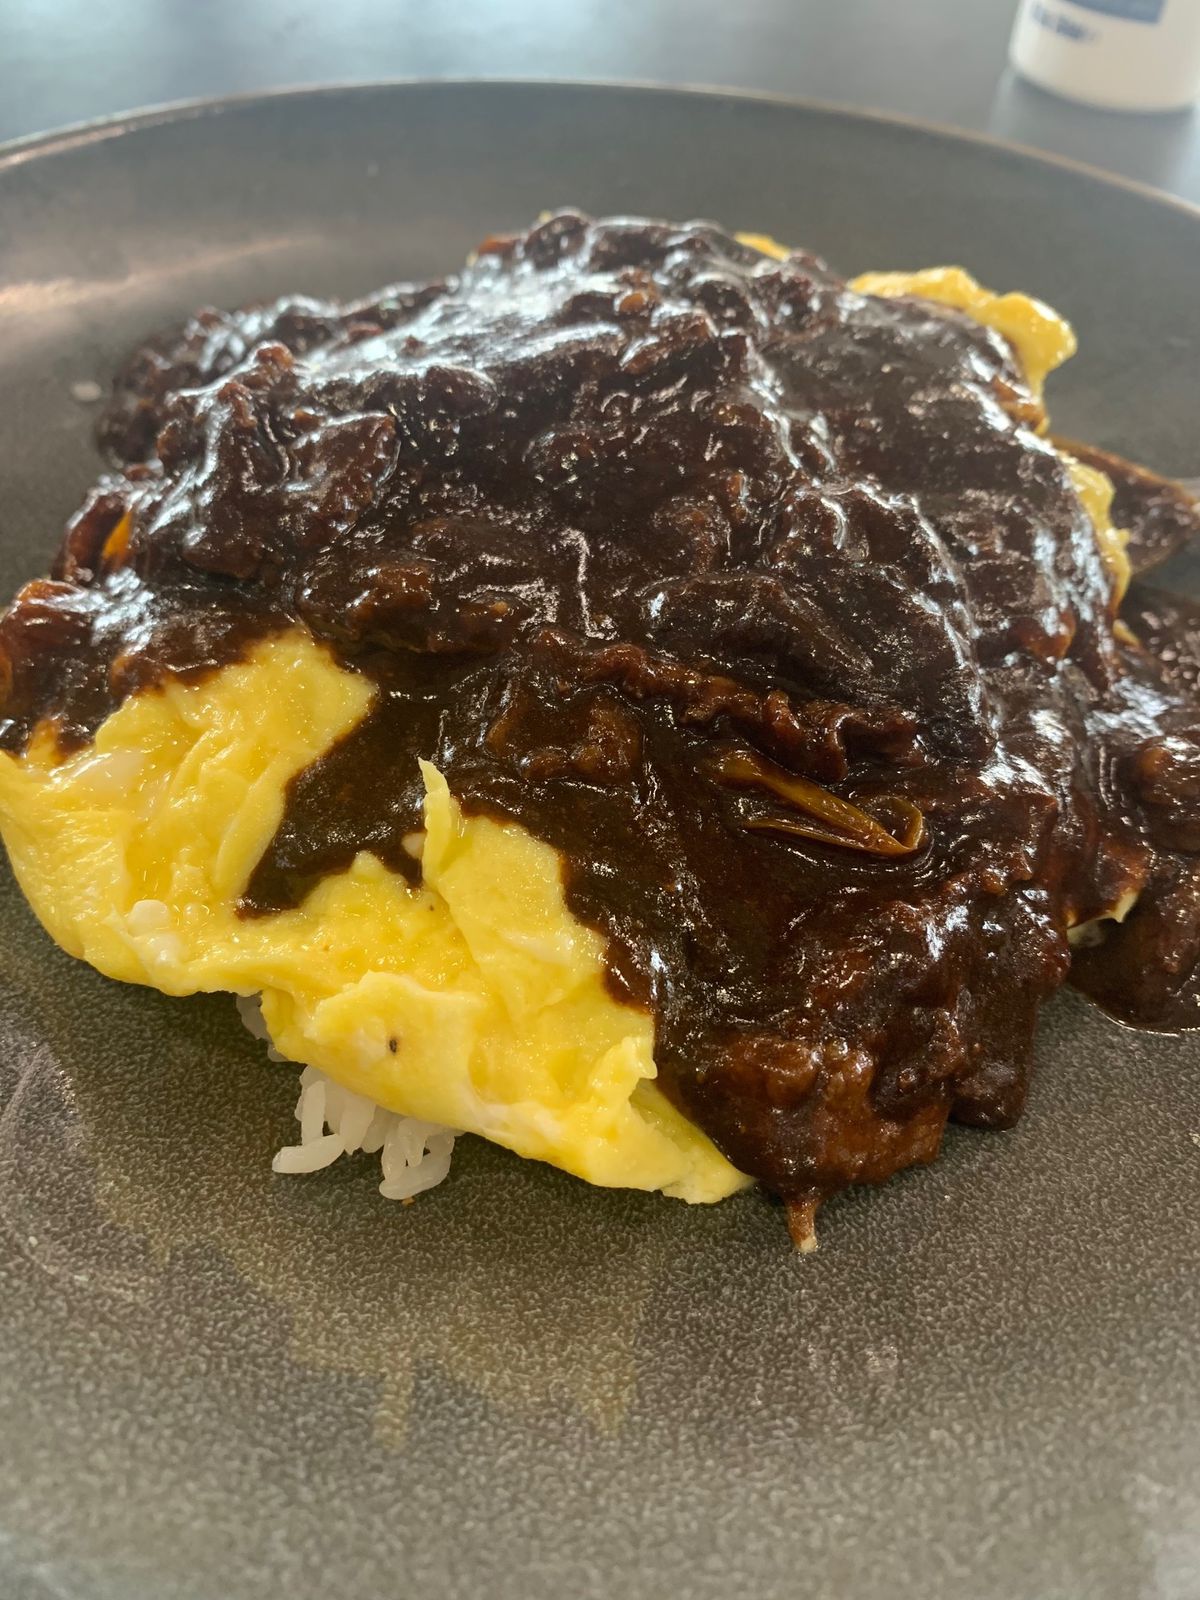 Japanese black curry on top of omurice (an omelette wrapped around a mound of white rice)